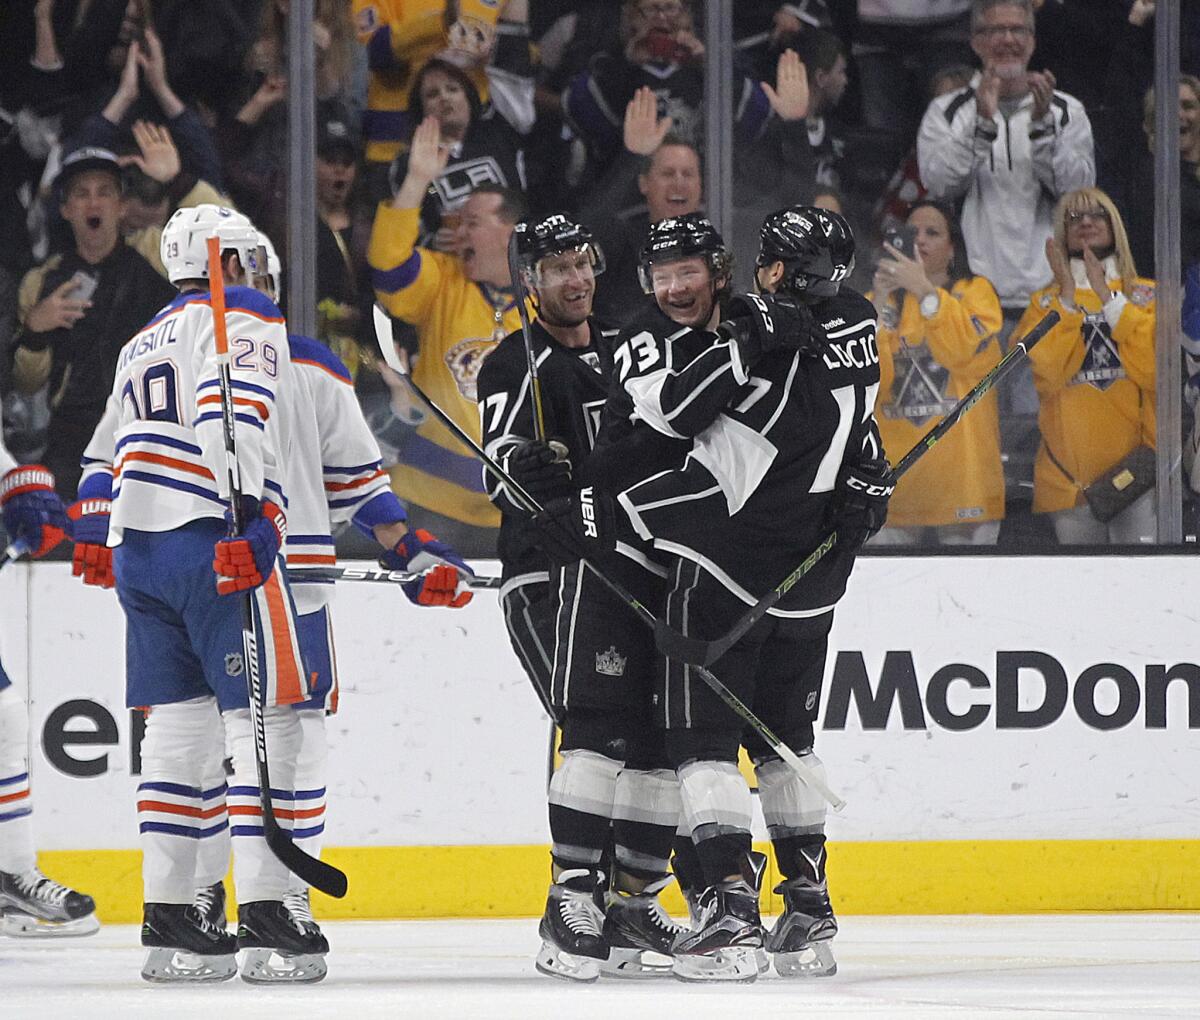 Kings center Tyler Toffoli (73) celebrates his goal with left wing Milan Lucic, right, and center Jeff Carter (77) as Oilers center Leon Draisaitl (29) skates by during the first period.